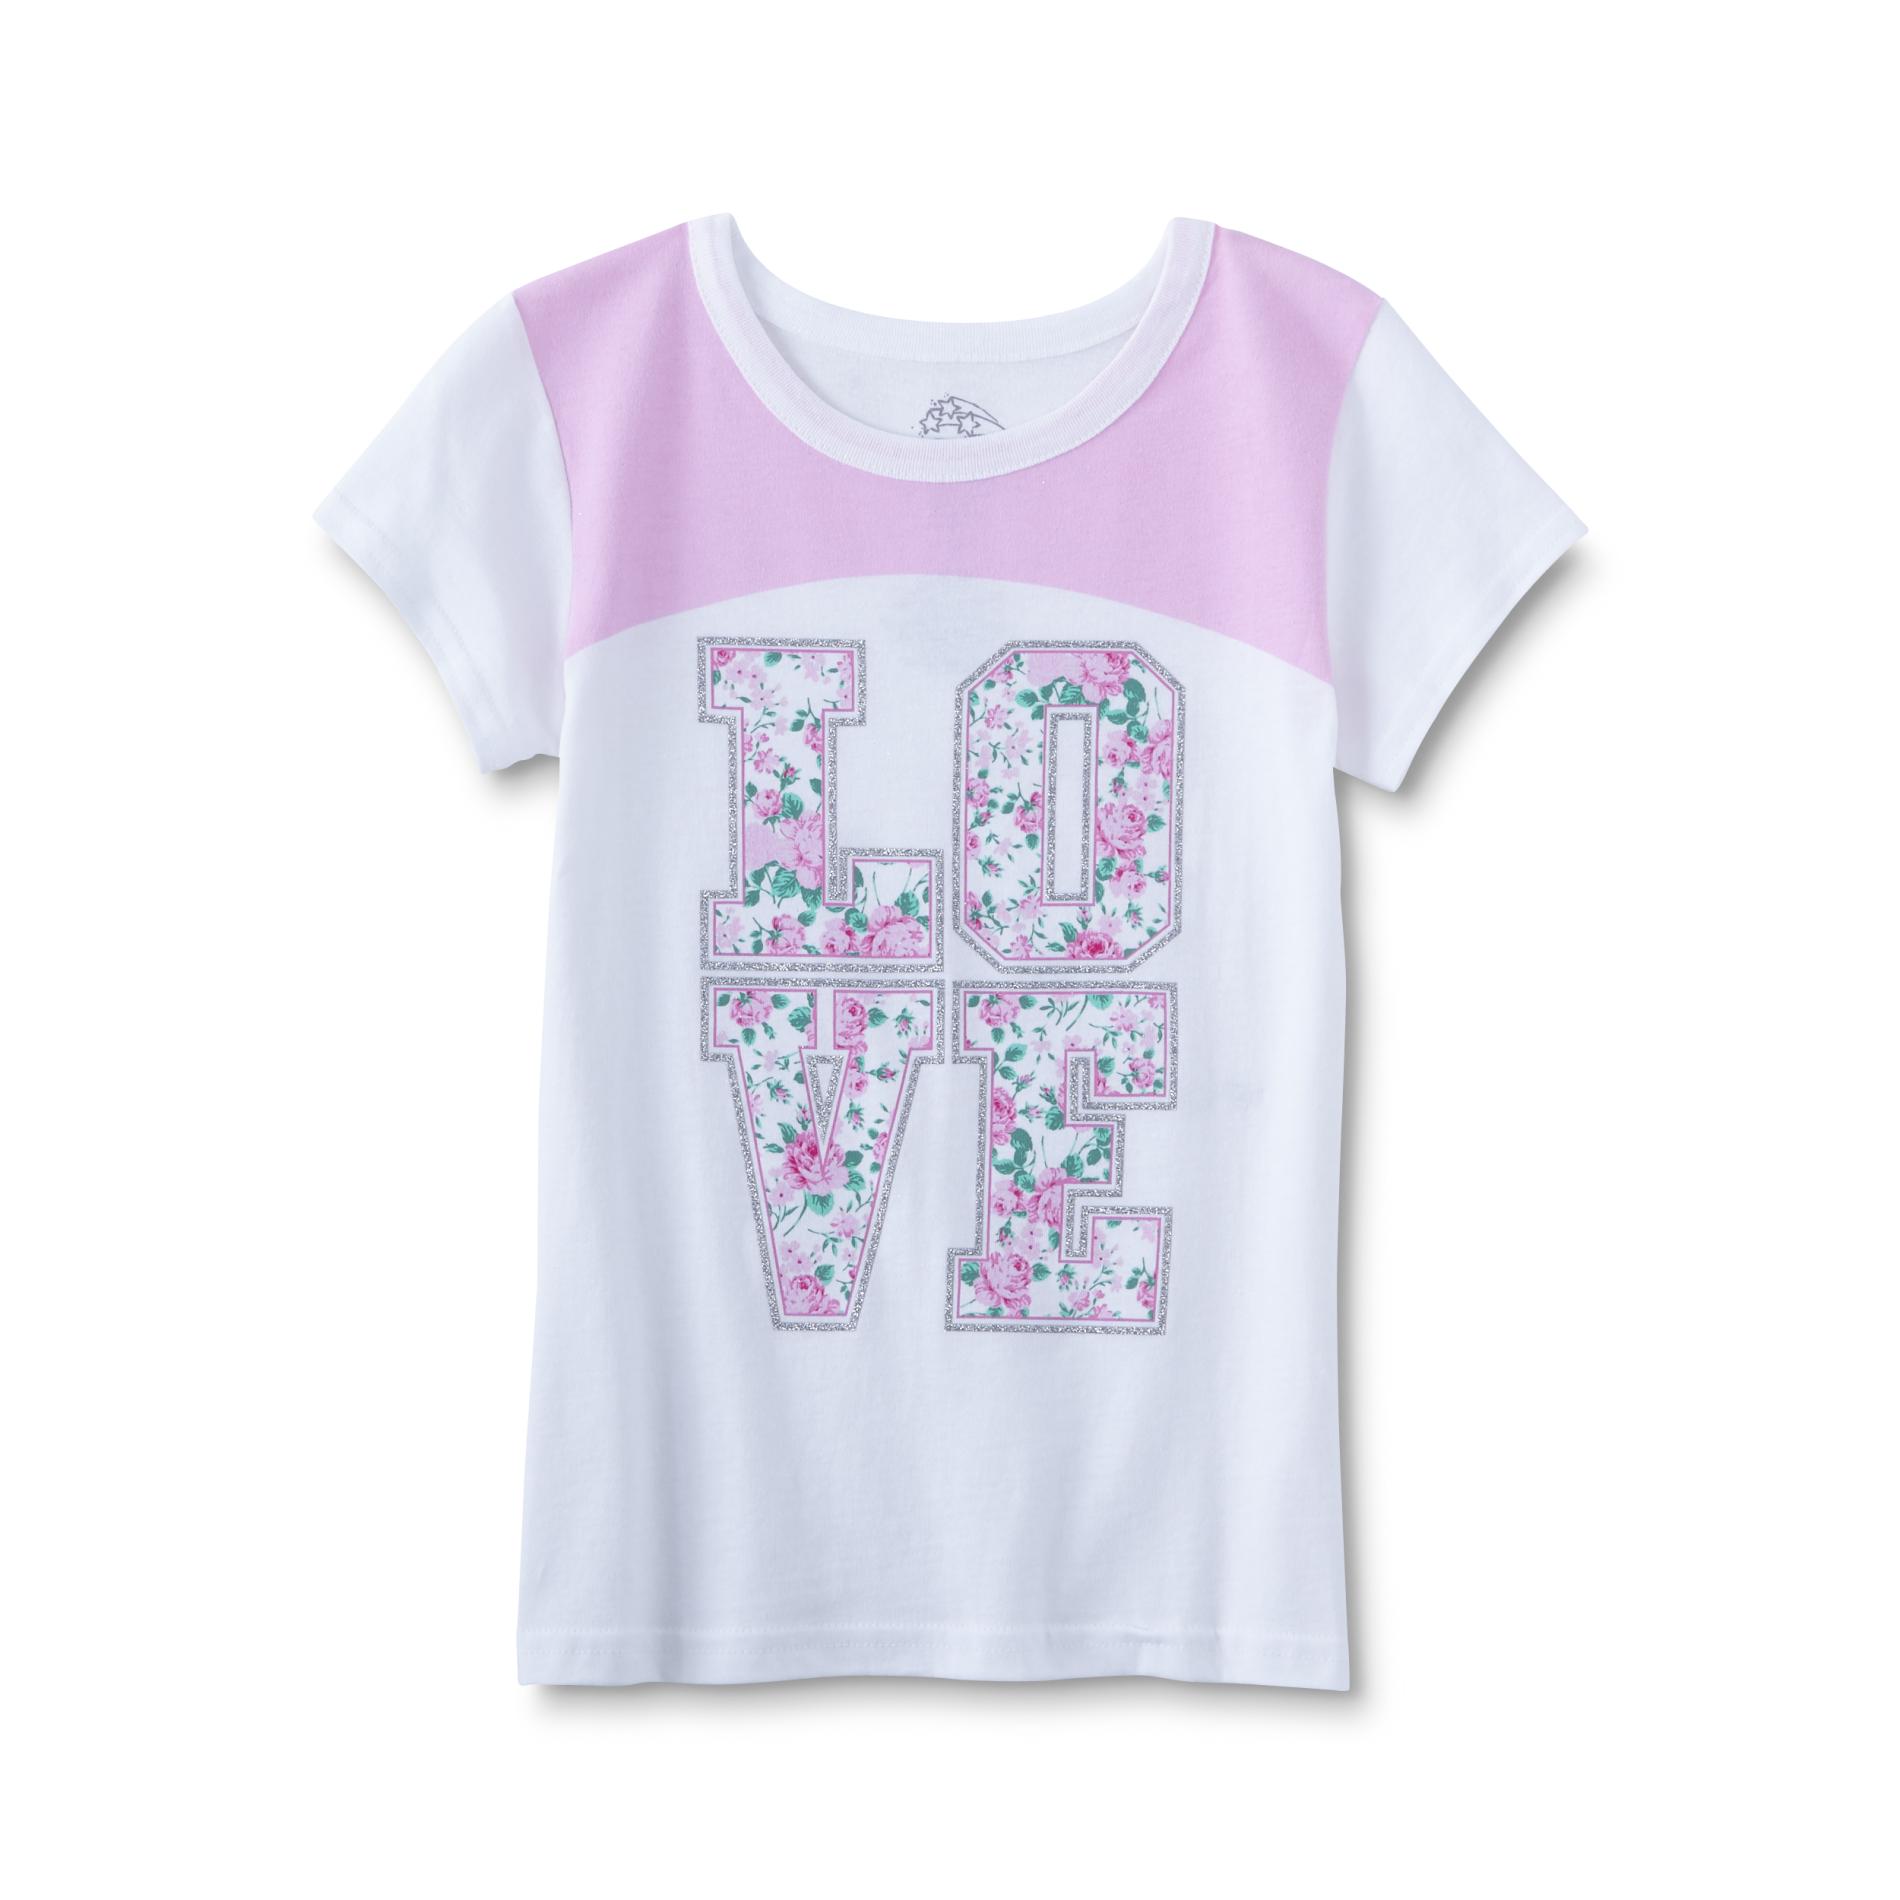 Route 66 Girls' Graphic T-Shirt - Love